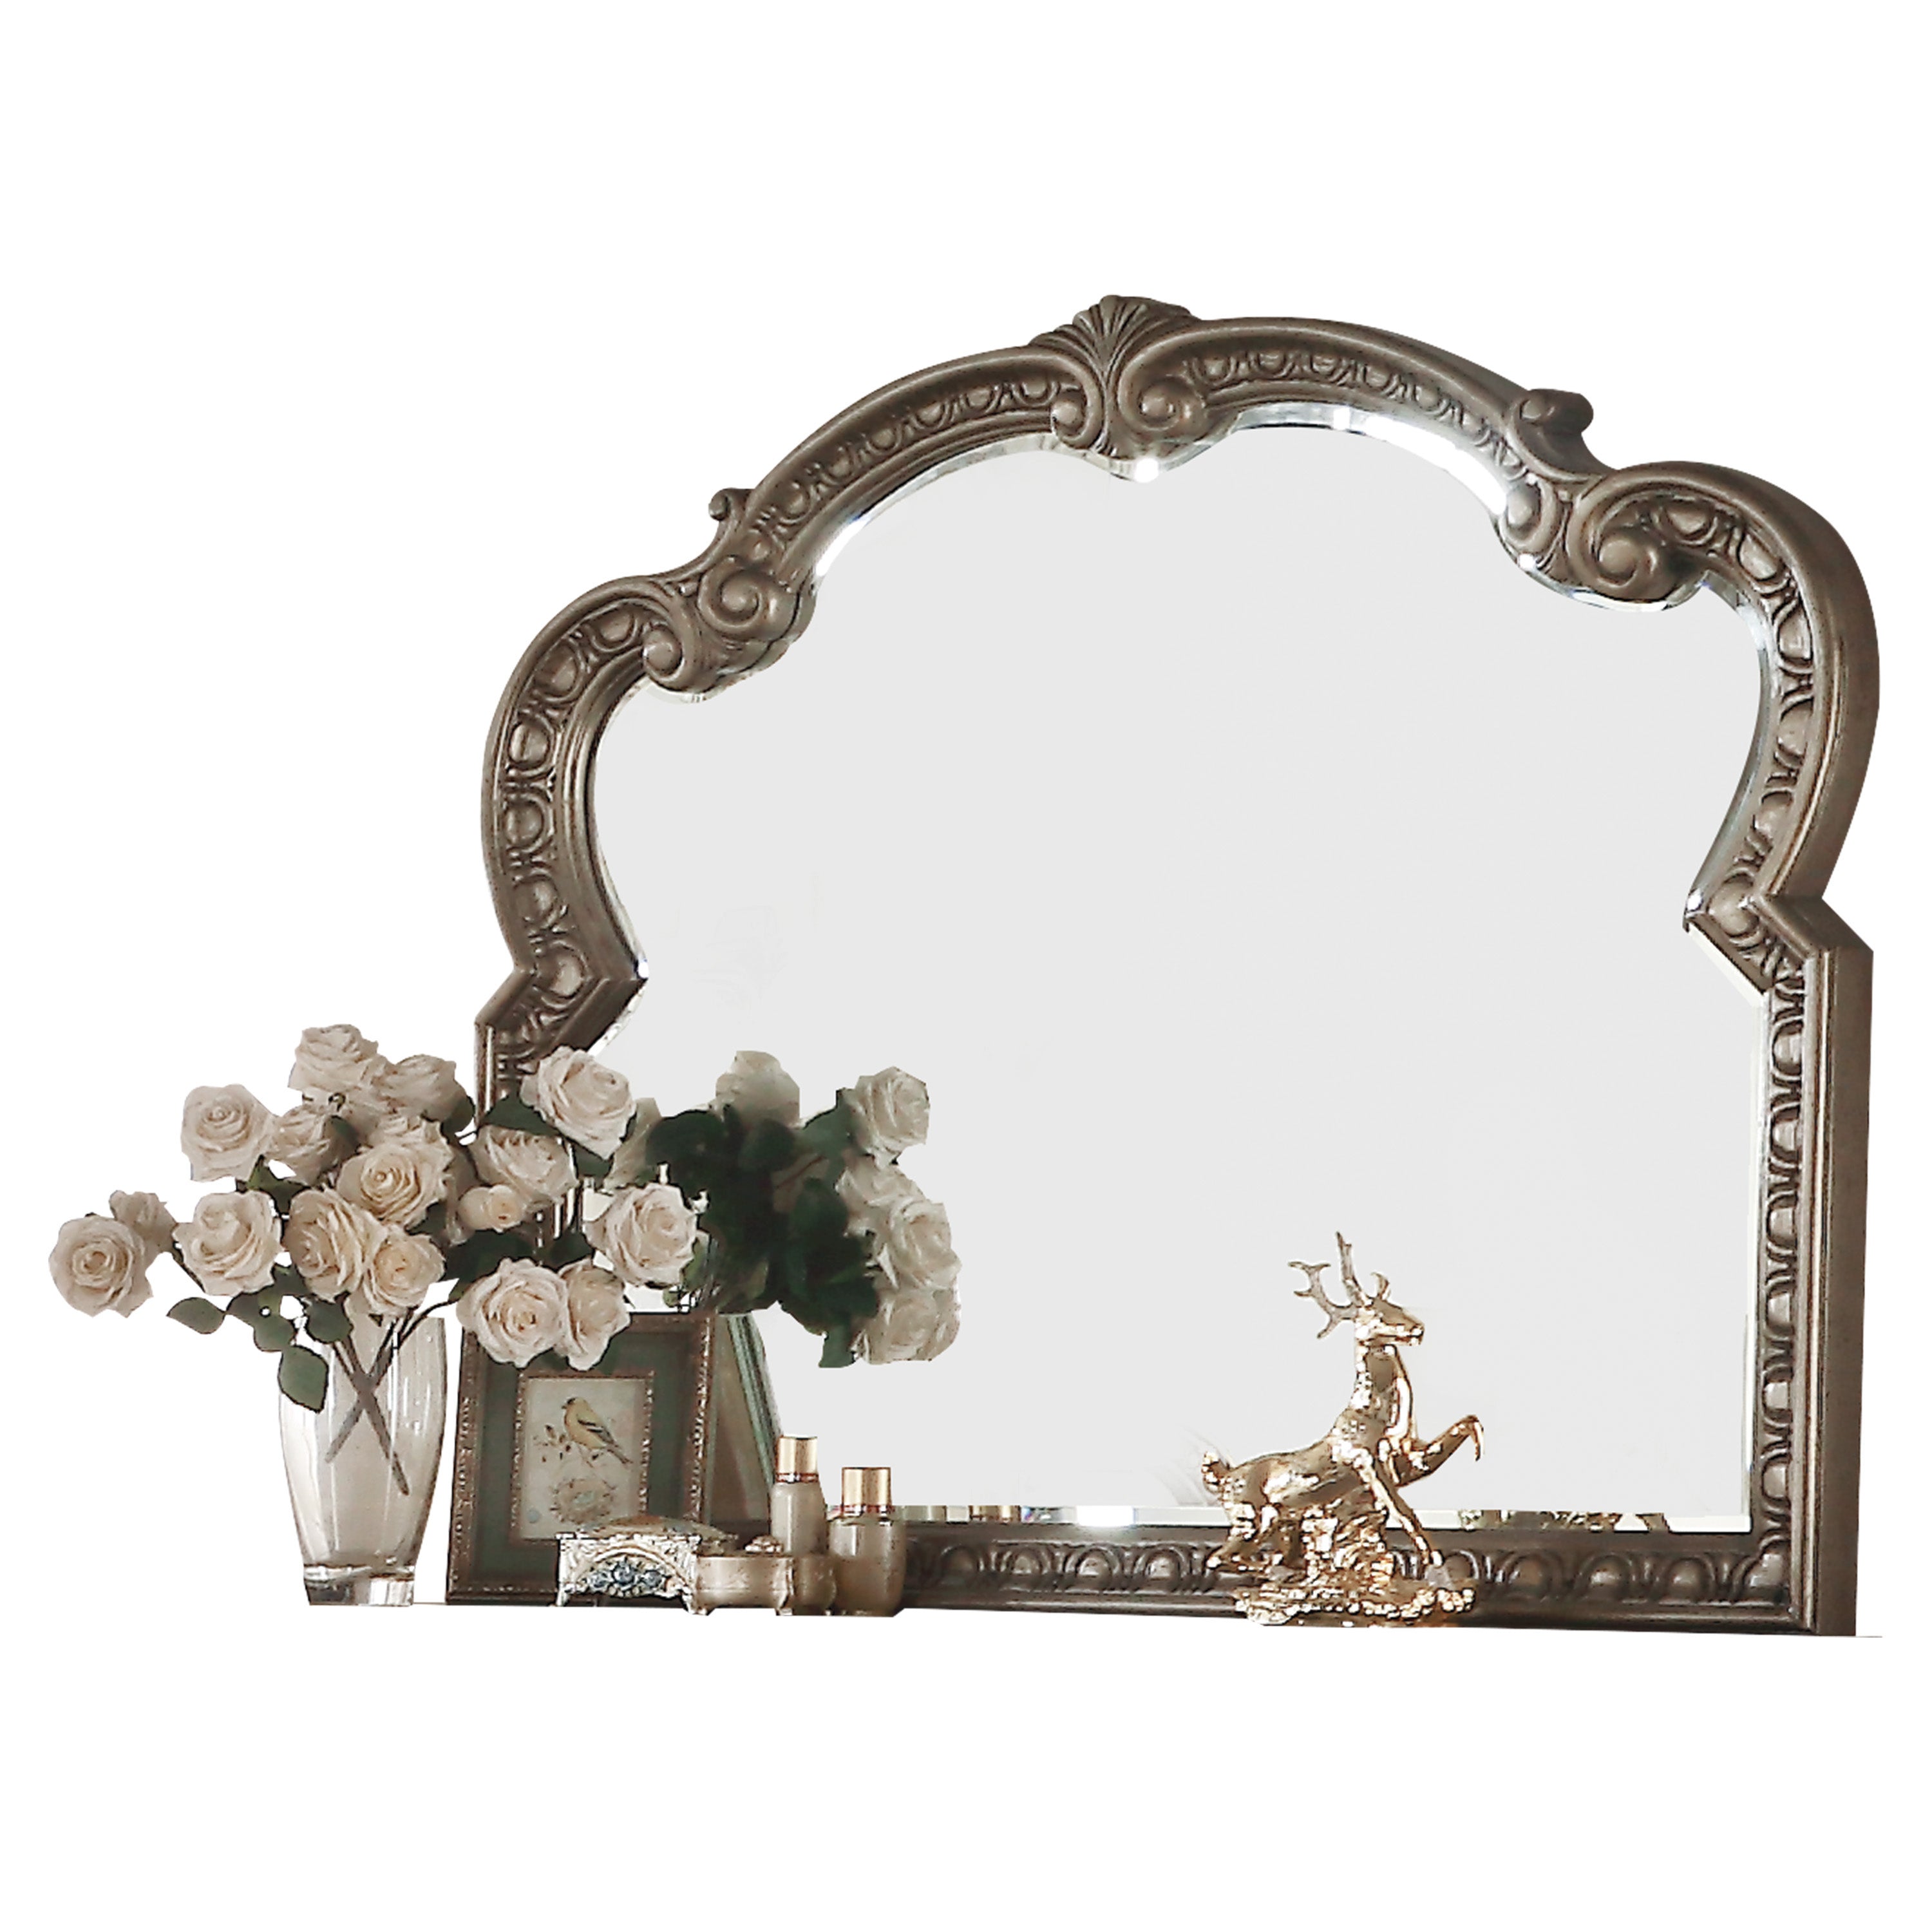 2" X 48" X 41" Antique Champagne Wood Poly Resin Mirror